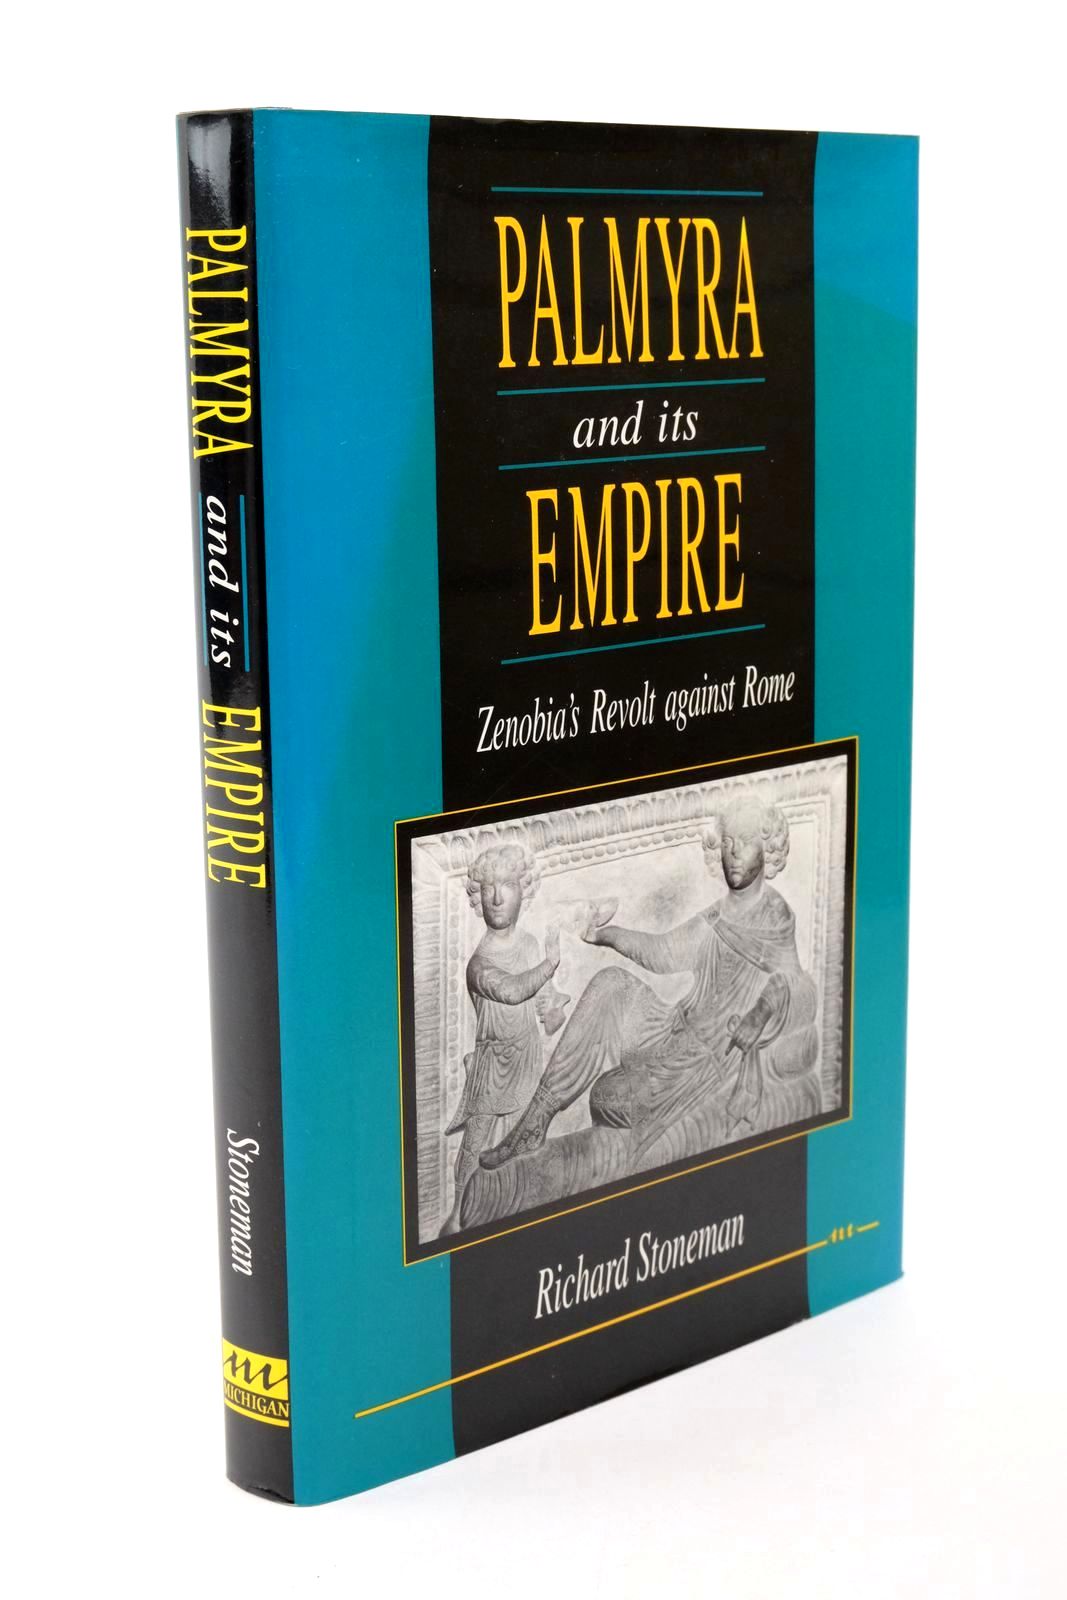 Photo of PALMYRA AND ITS EMPIRE- Stock Number: 1322605